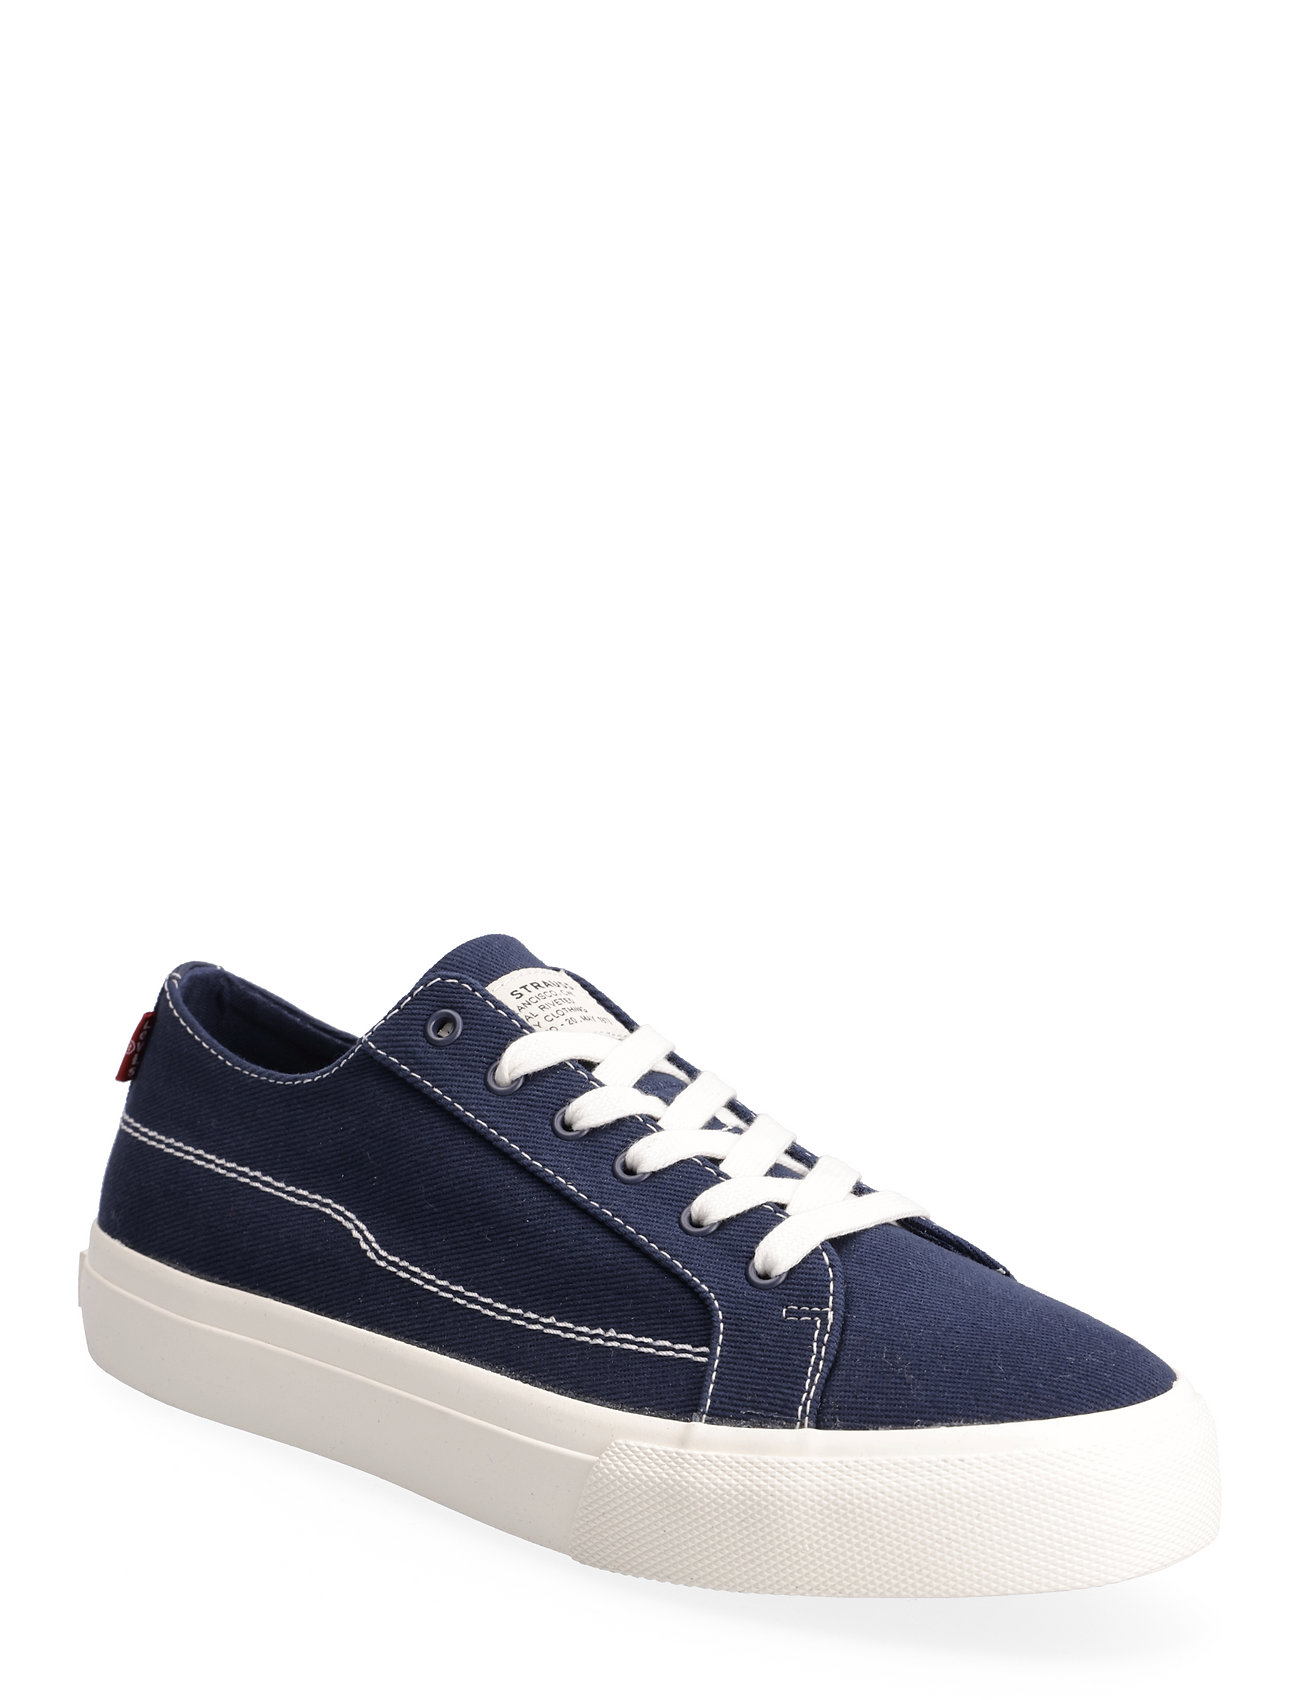 Levi's Shoes Decon Lace (Navy Blue), ( €) | Large selection of  outlet-styles 